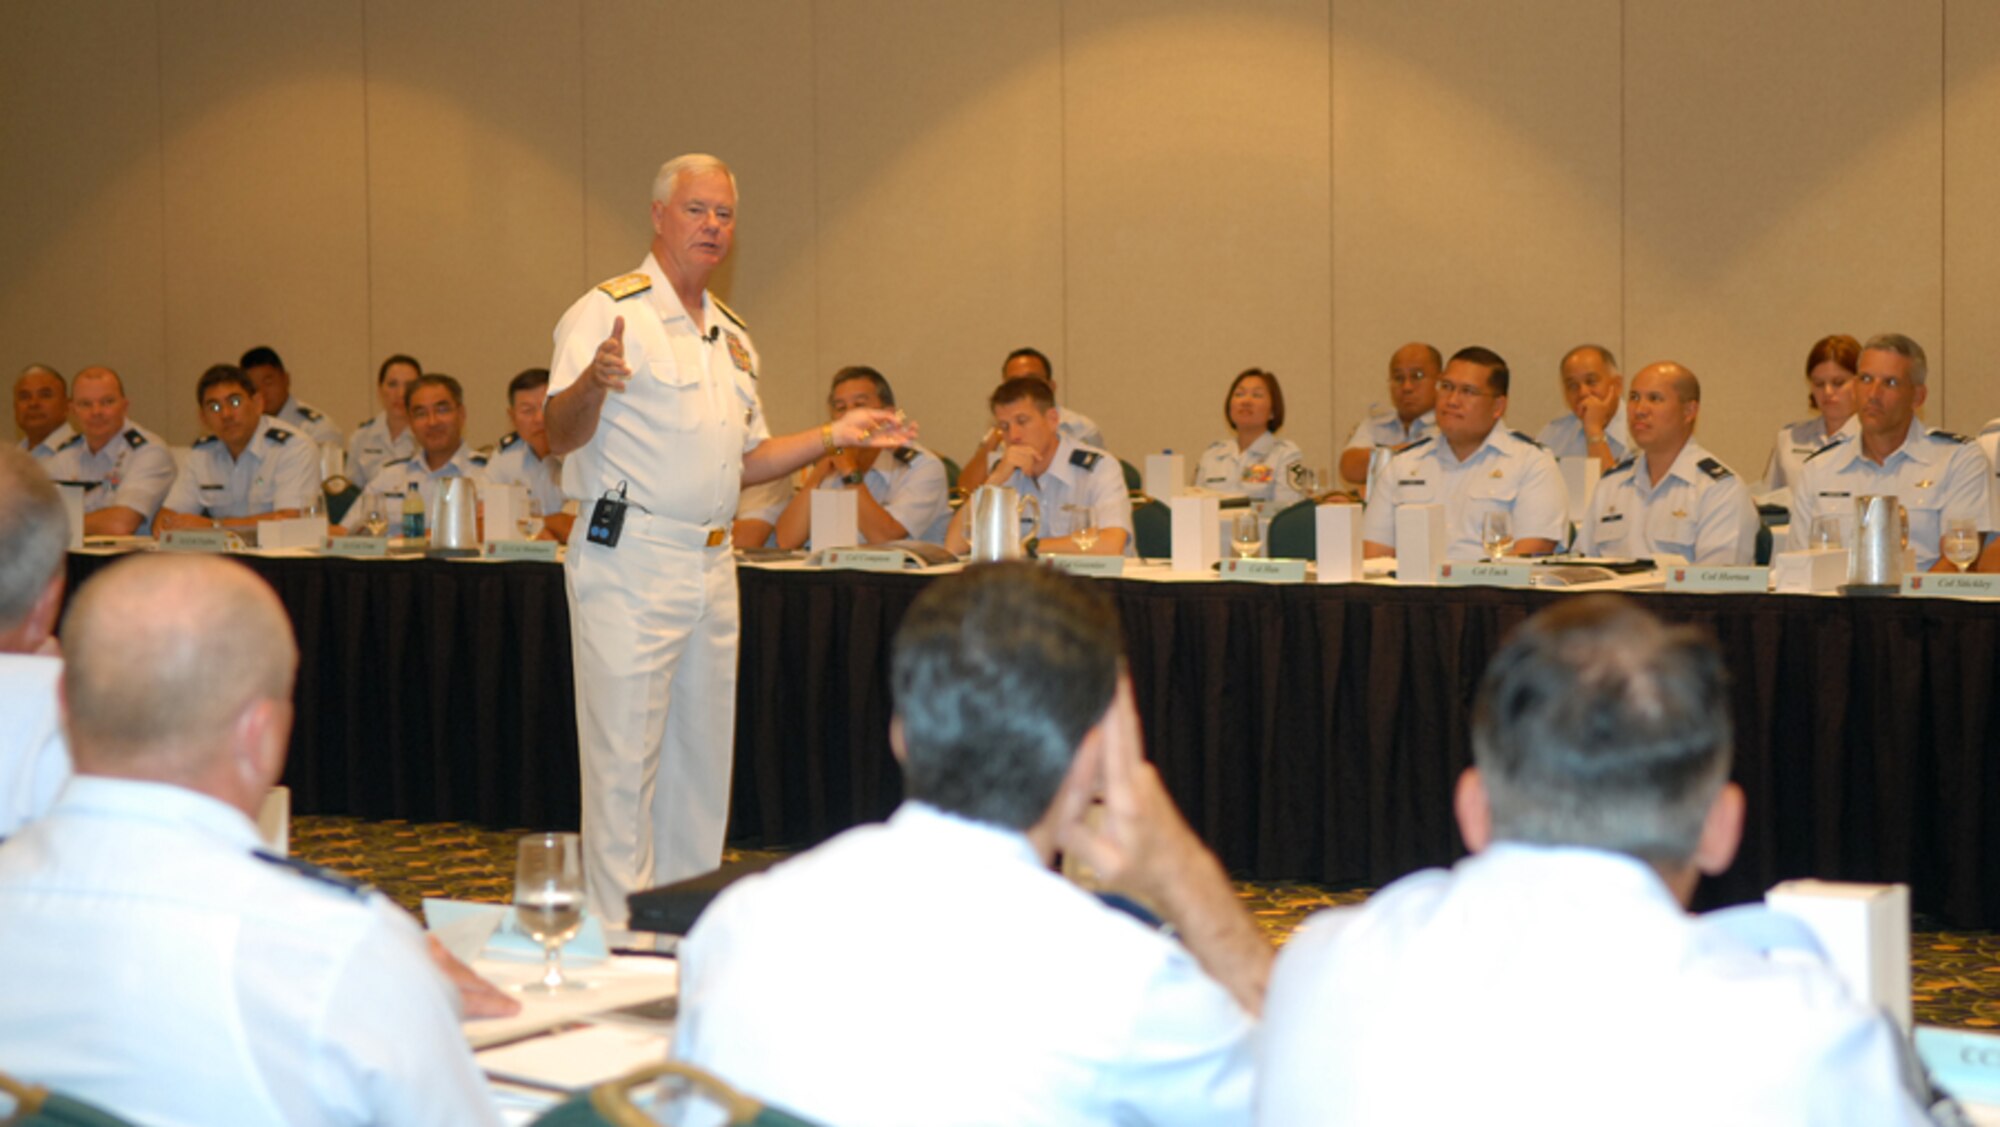 Adm. Timothy J. Keating, PACOM commander, speaks about shaping the battlefield and the importance of developing and maintaining positive relationships with nations in the Pacific, like China and North Korea.  Adm. Keating was a guest speaker at the 31st annual HIANG Commanders Conference held in Lihue, Kauai